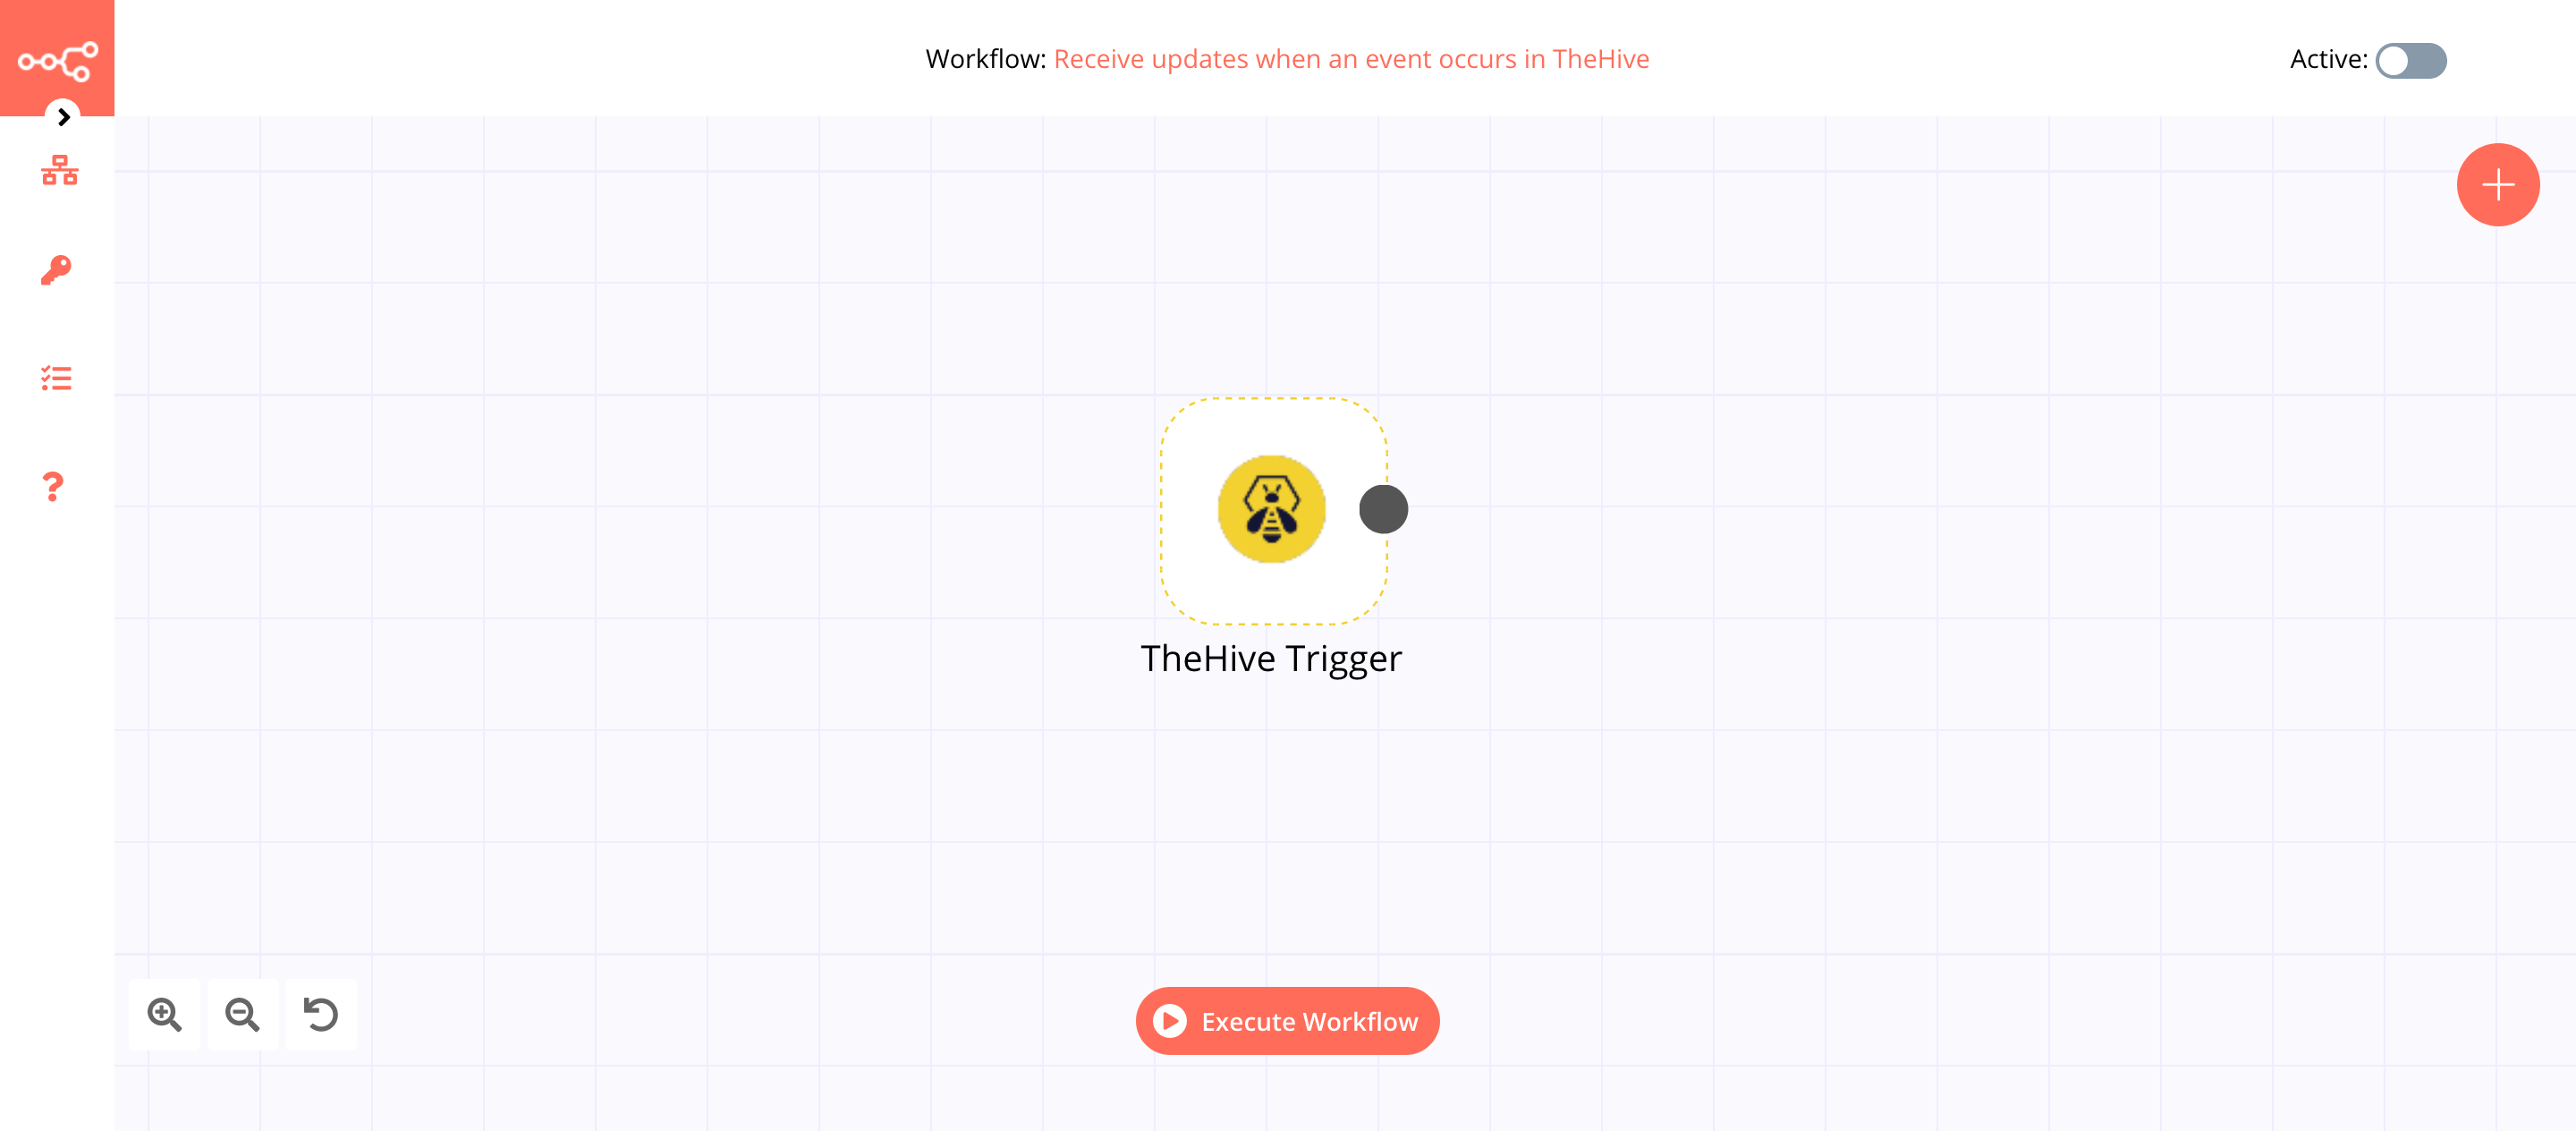 A workflow with the TheHive Trigger node